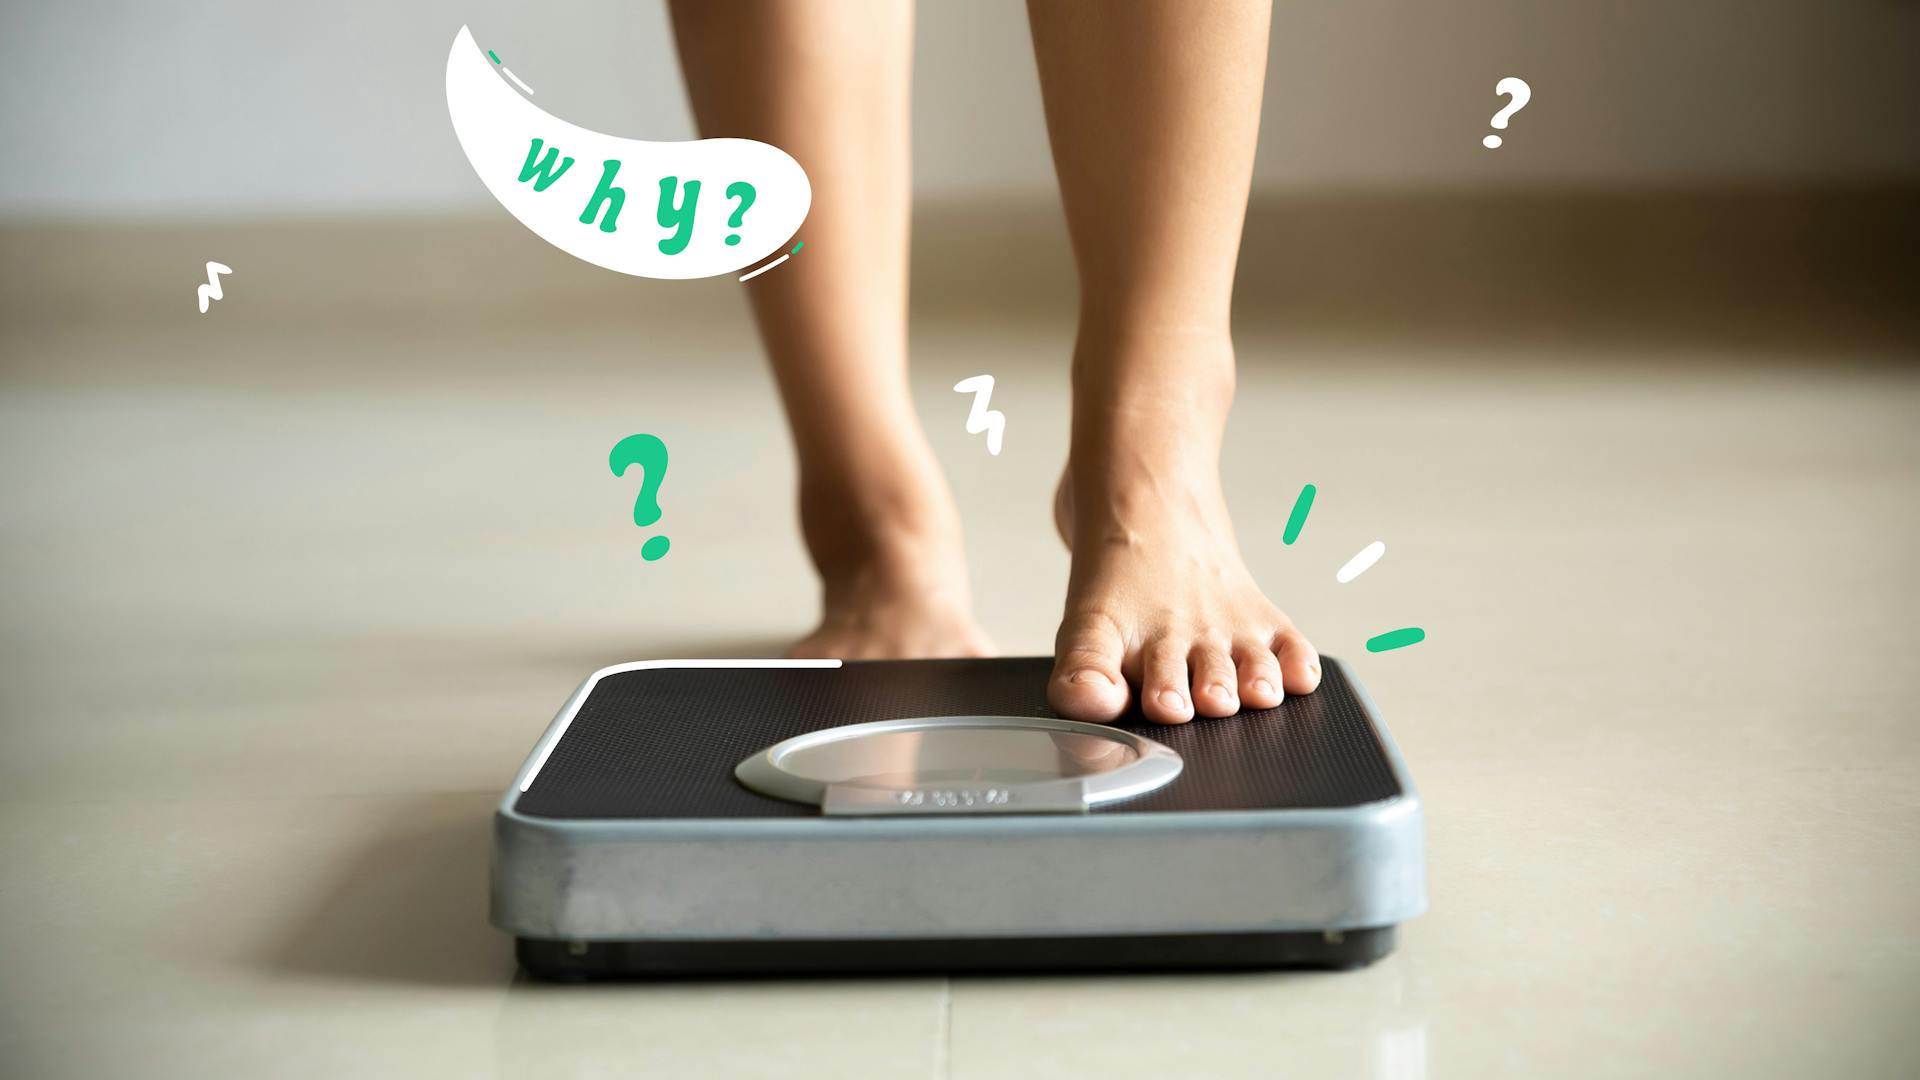 Not losing weight? Try weighing your food for a week